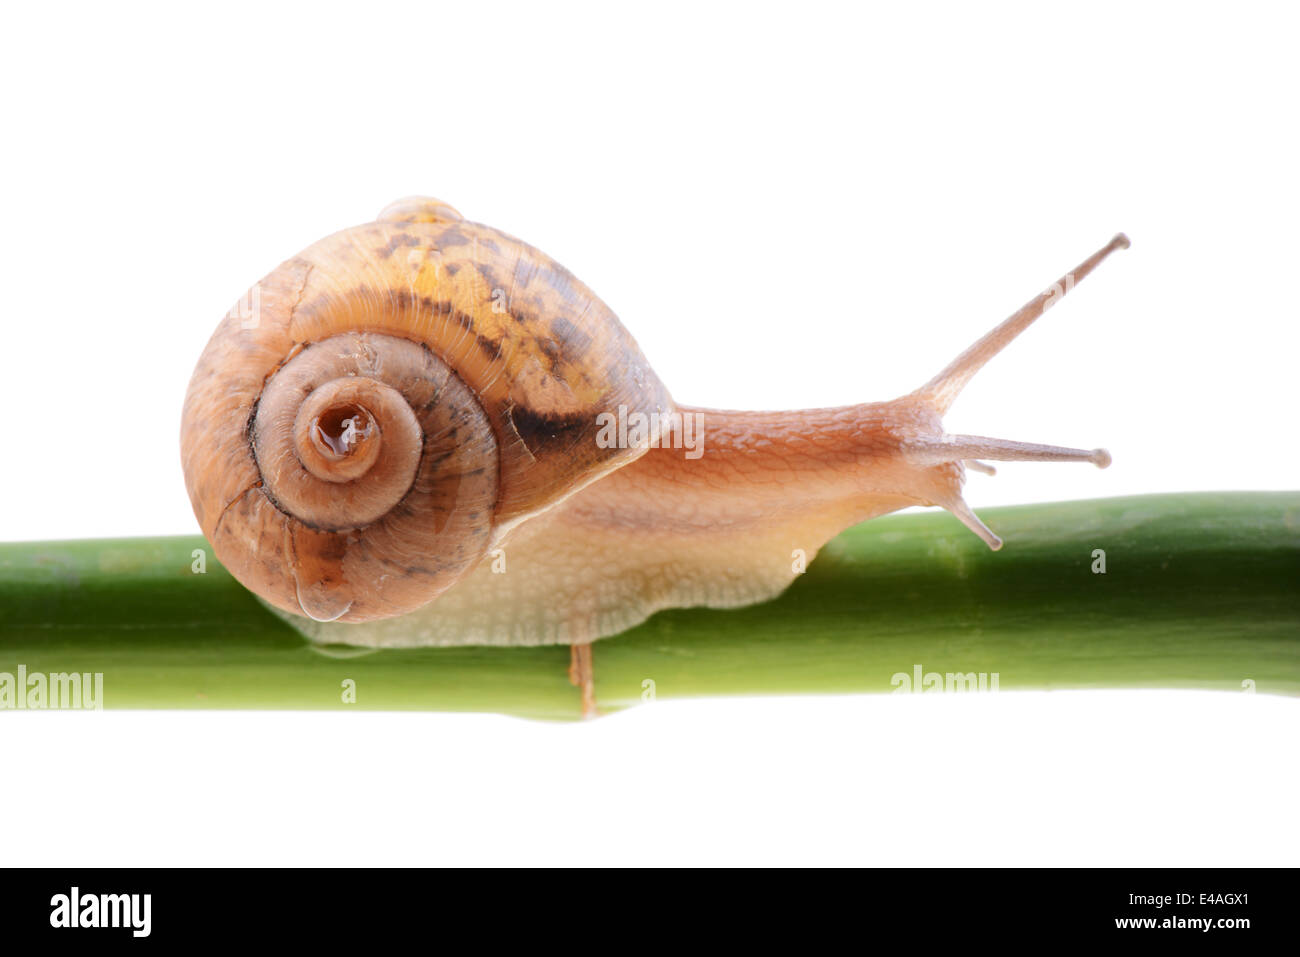 Snail on a green bamboo stem Stock Photo